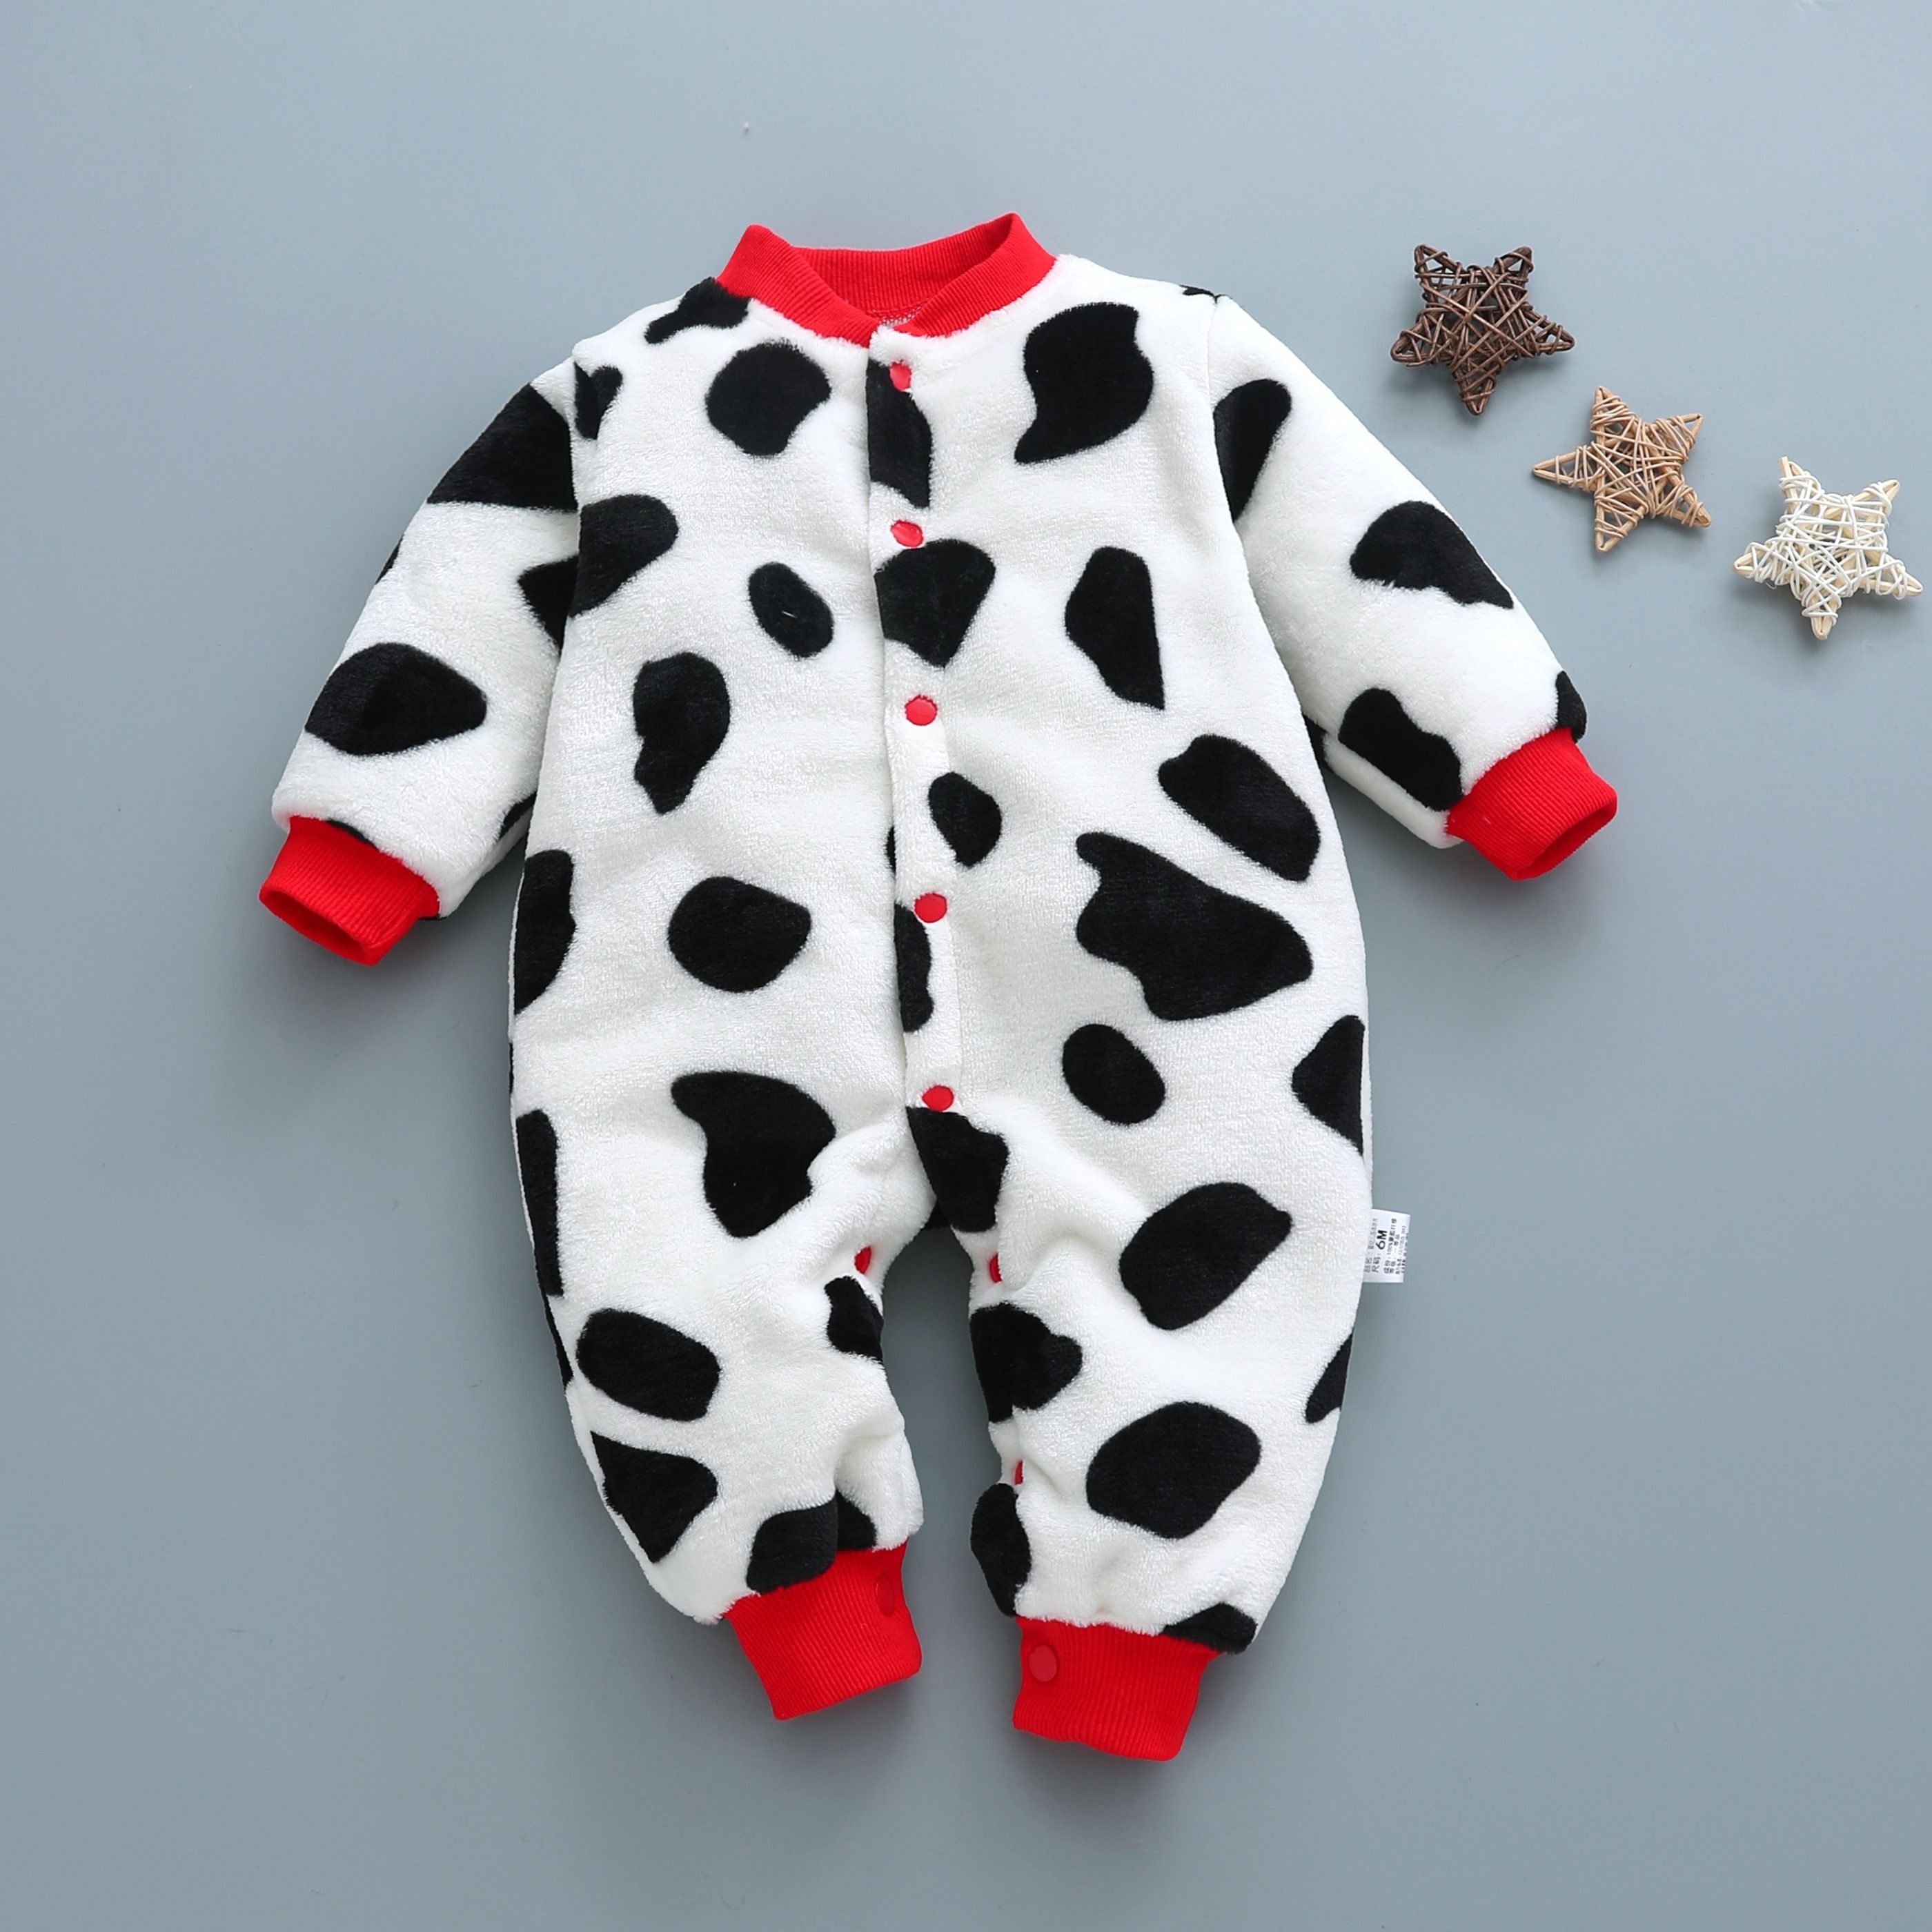 Baby flannel one piece suit spring and autumn winter clothes newborn clothes full moon baby coral velvet Romper pajamas climbing clothes